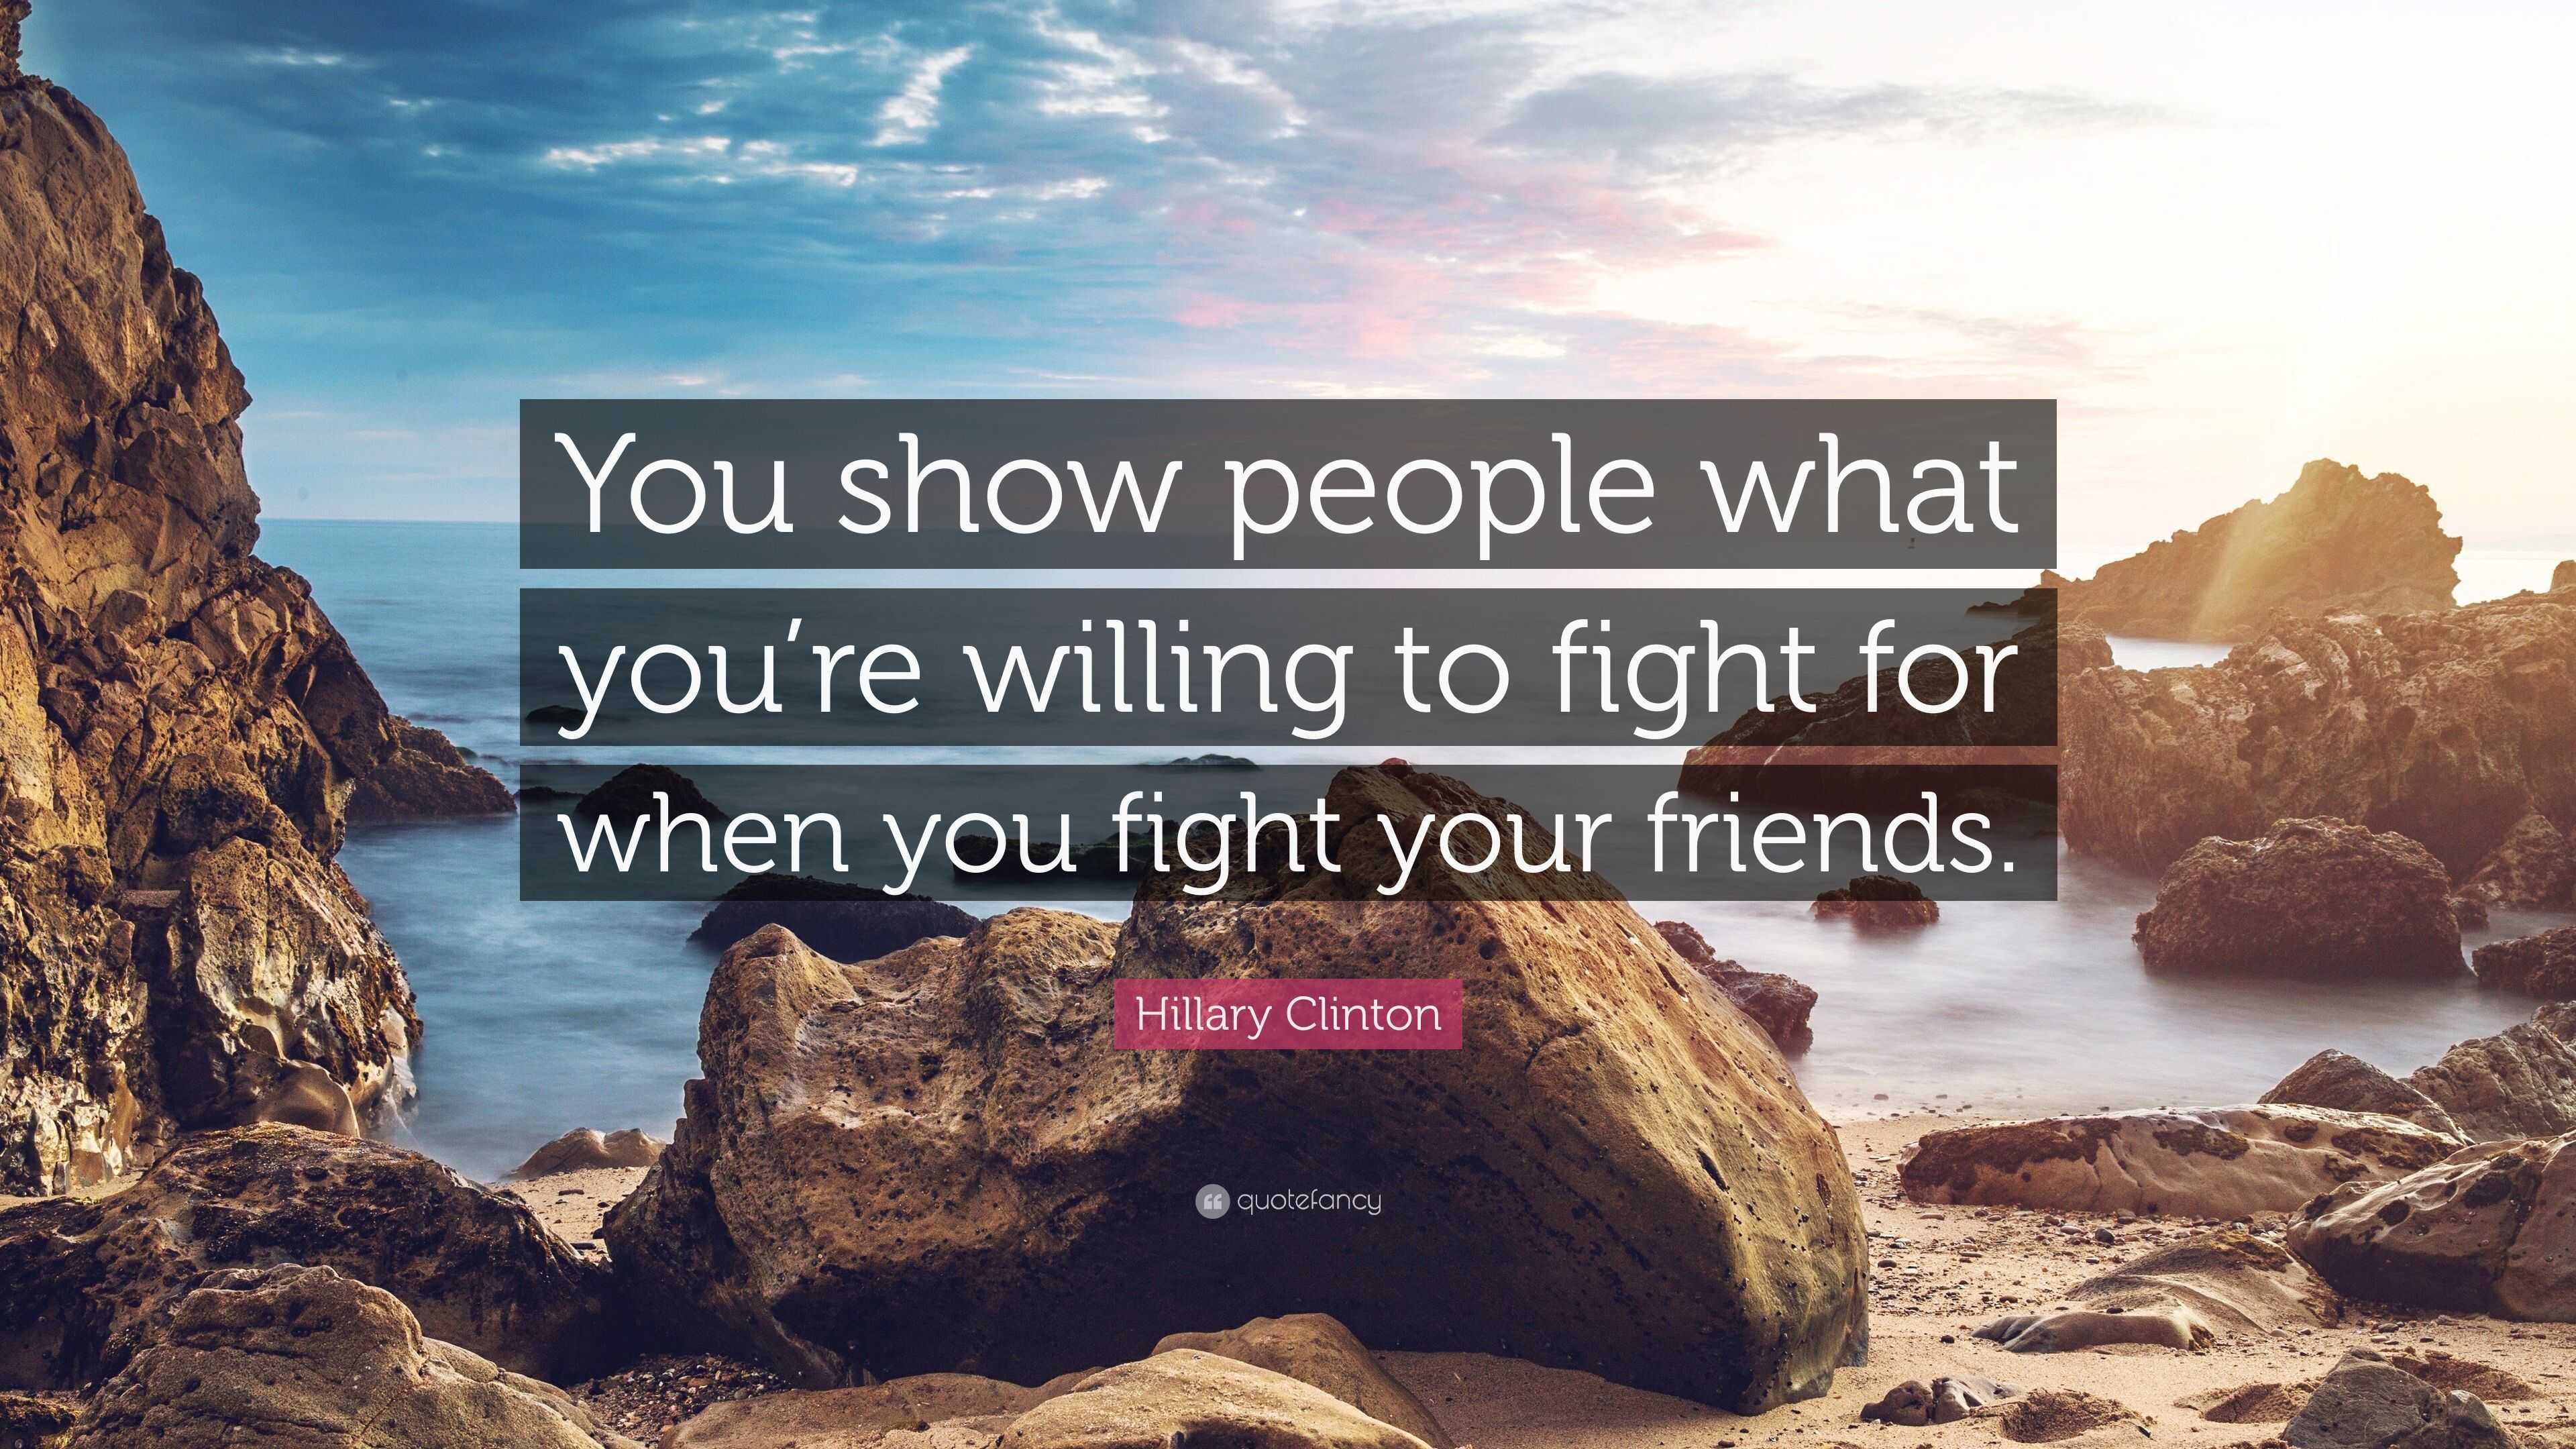 Hillary Clinton Quote: “You show people what you’re willing to fight ...